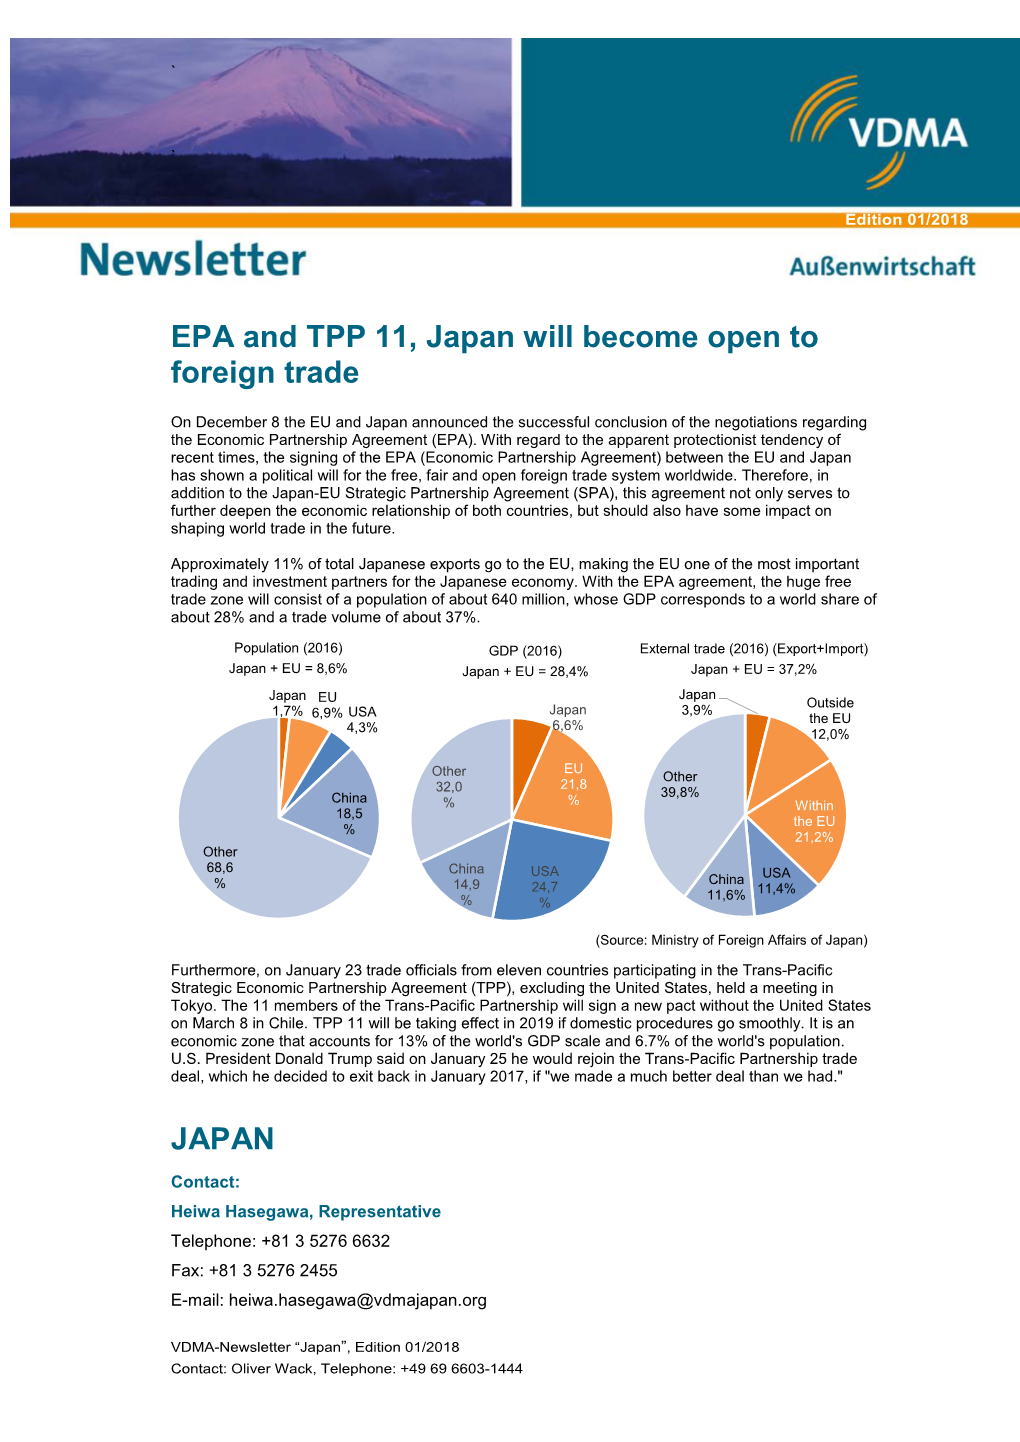 EPA and TPP 11, Japan Will Become Open to Foreign Trade JAPAN